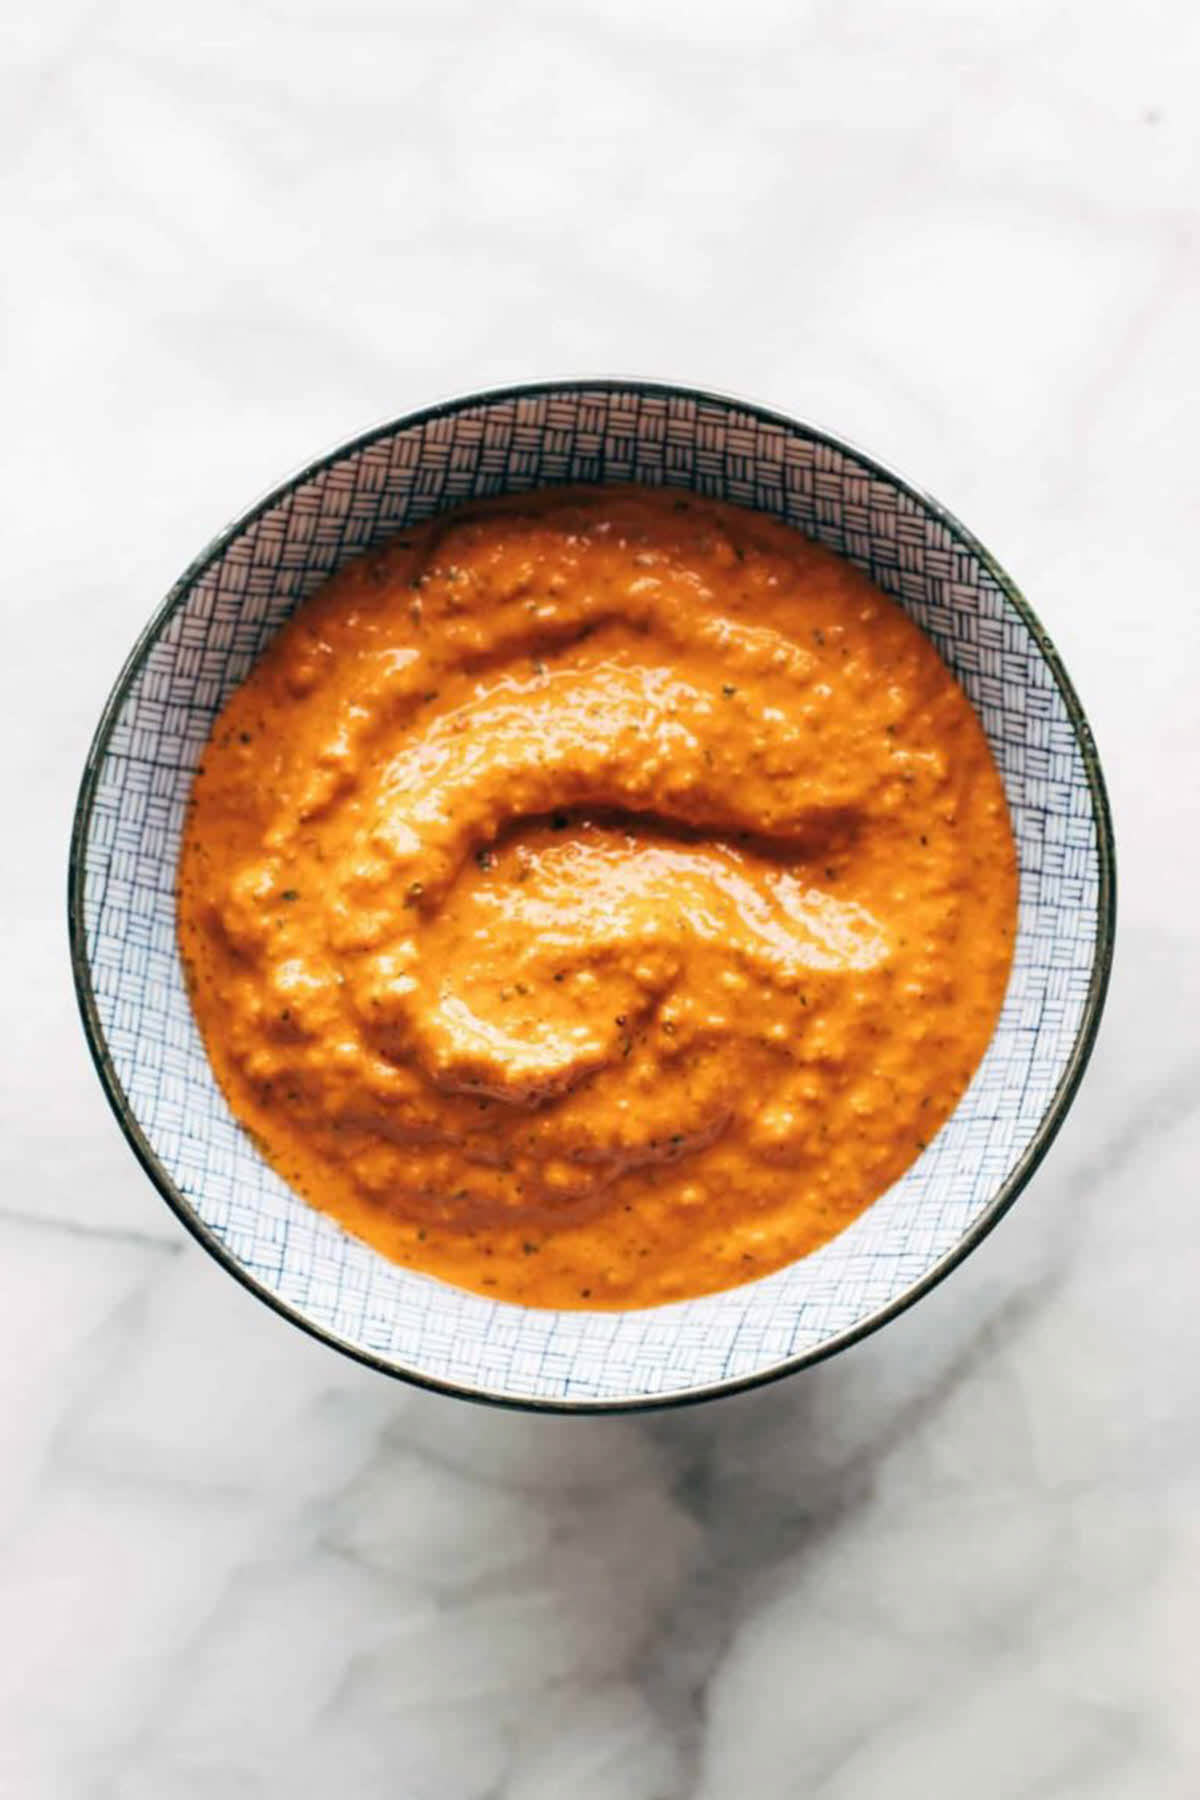 top down view of roasted red pepper sauce in a decorative bowl.